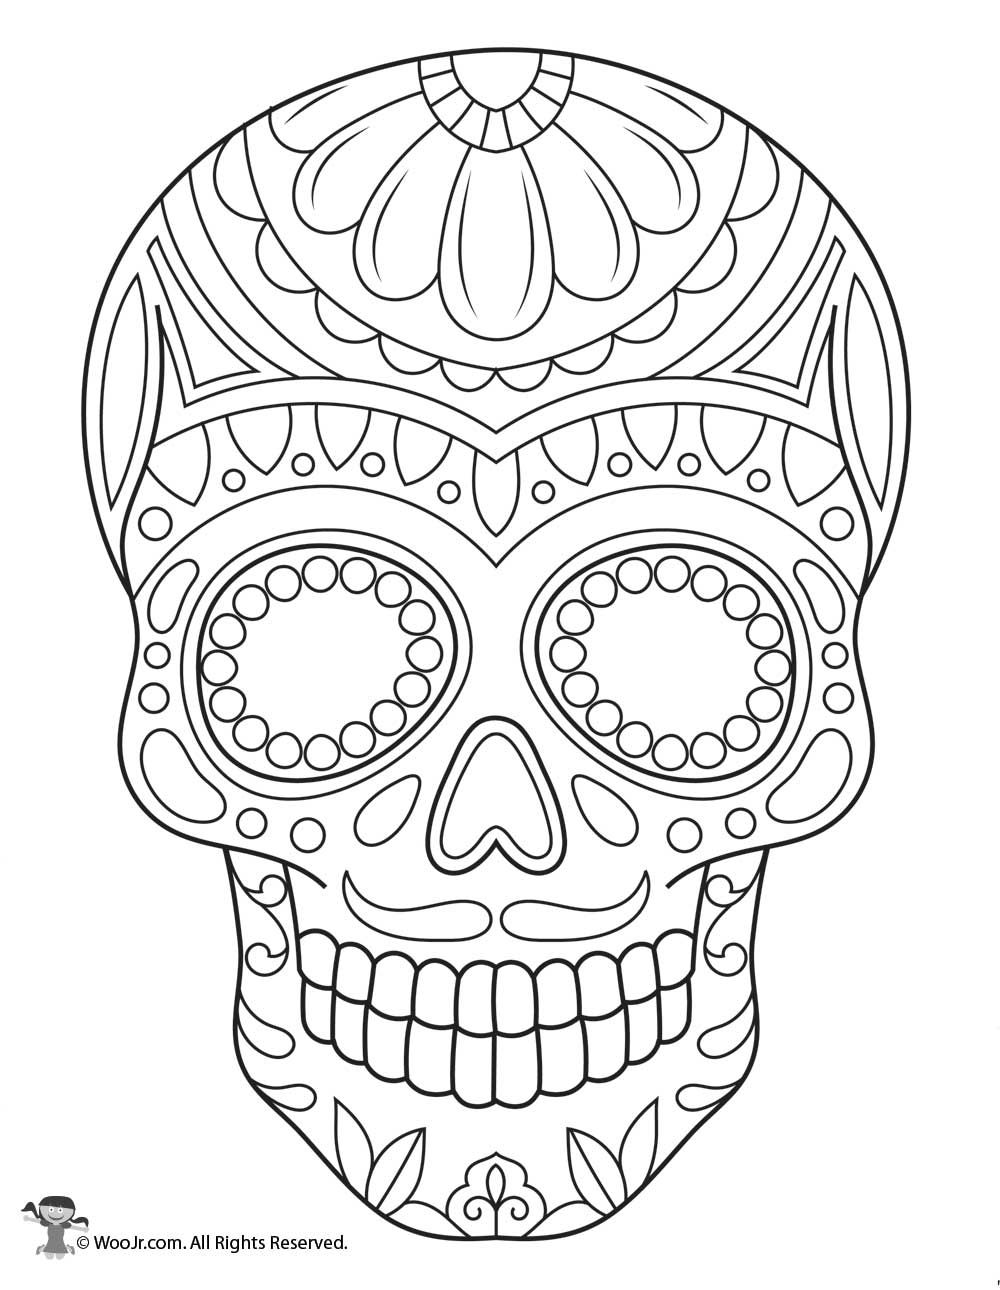 Colorful day of the dead coloring pages with intricate sugar skull designs